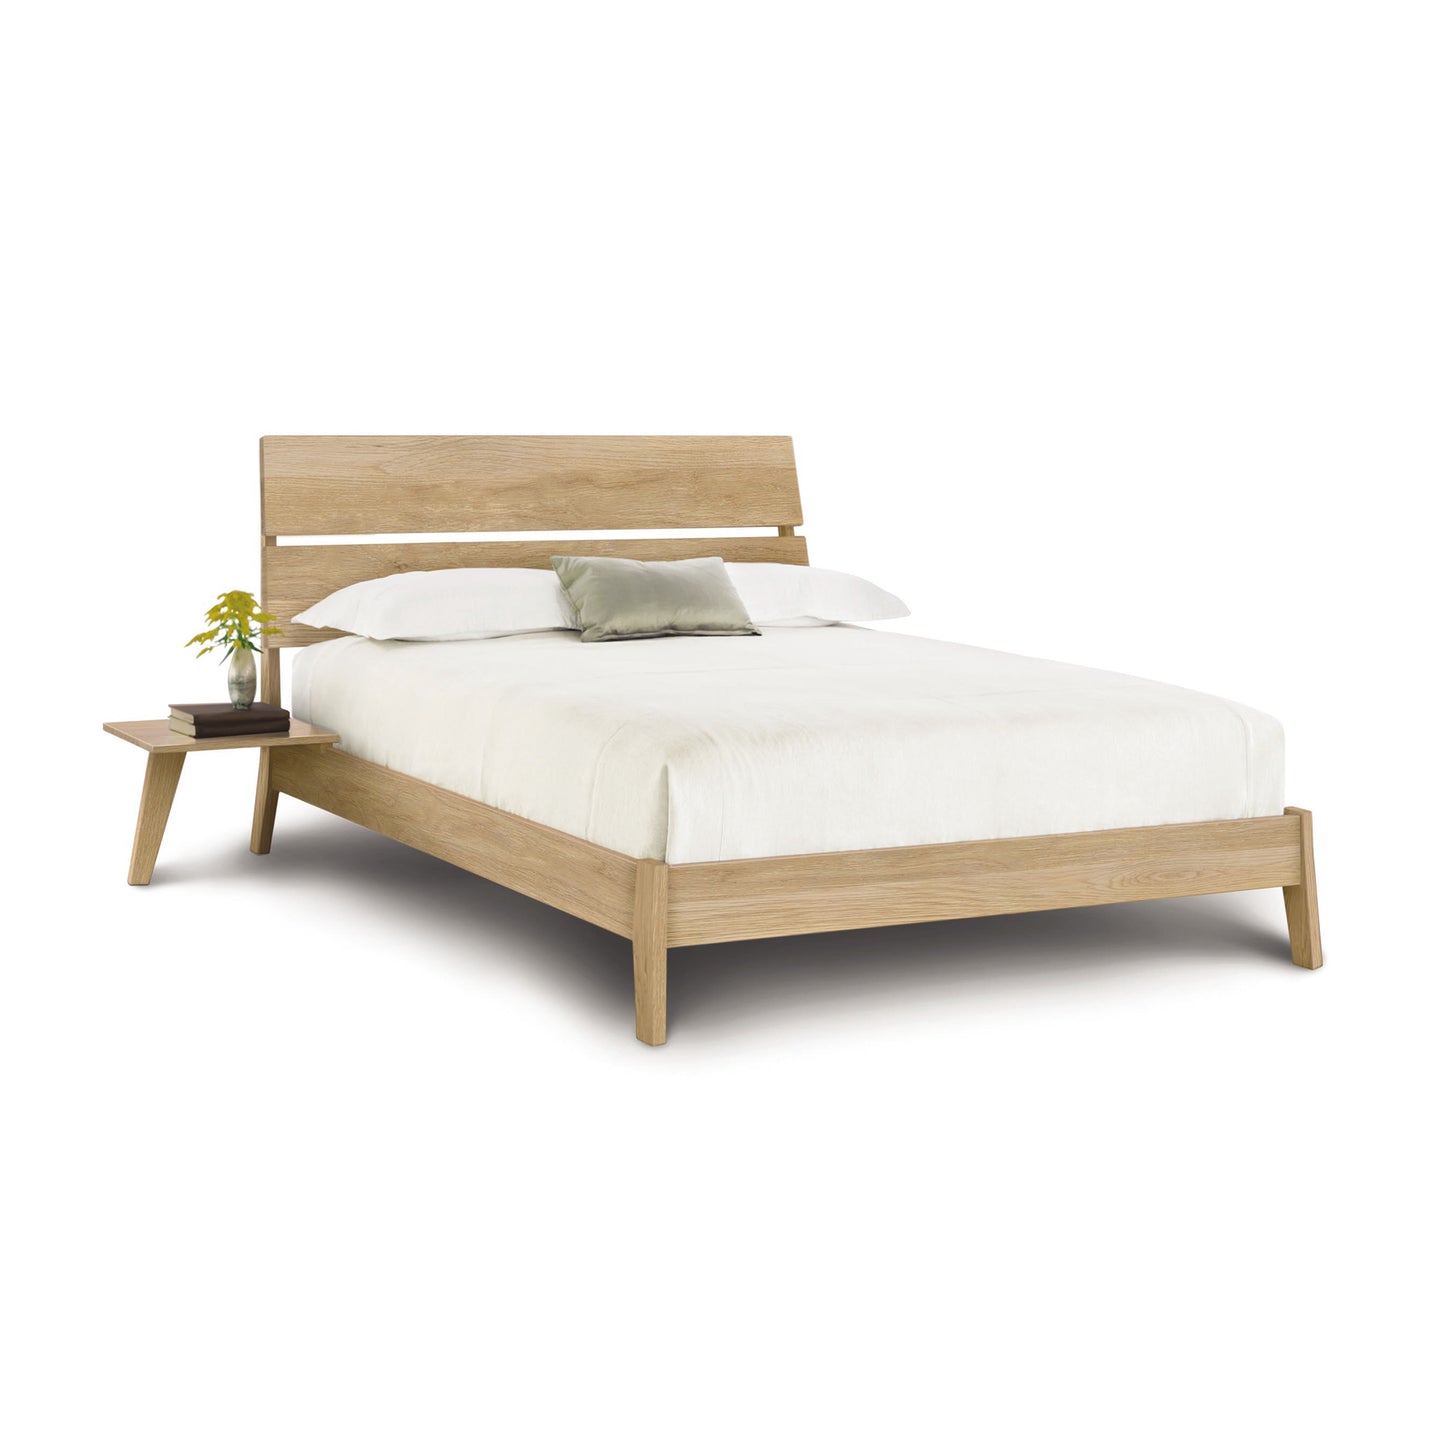 The Copeland Furniture Linn Oak Platform Bed features a sustainable design with a wooden headboard and footboard.